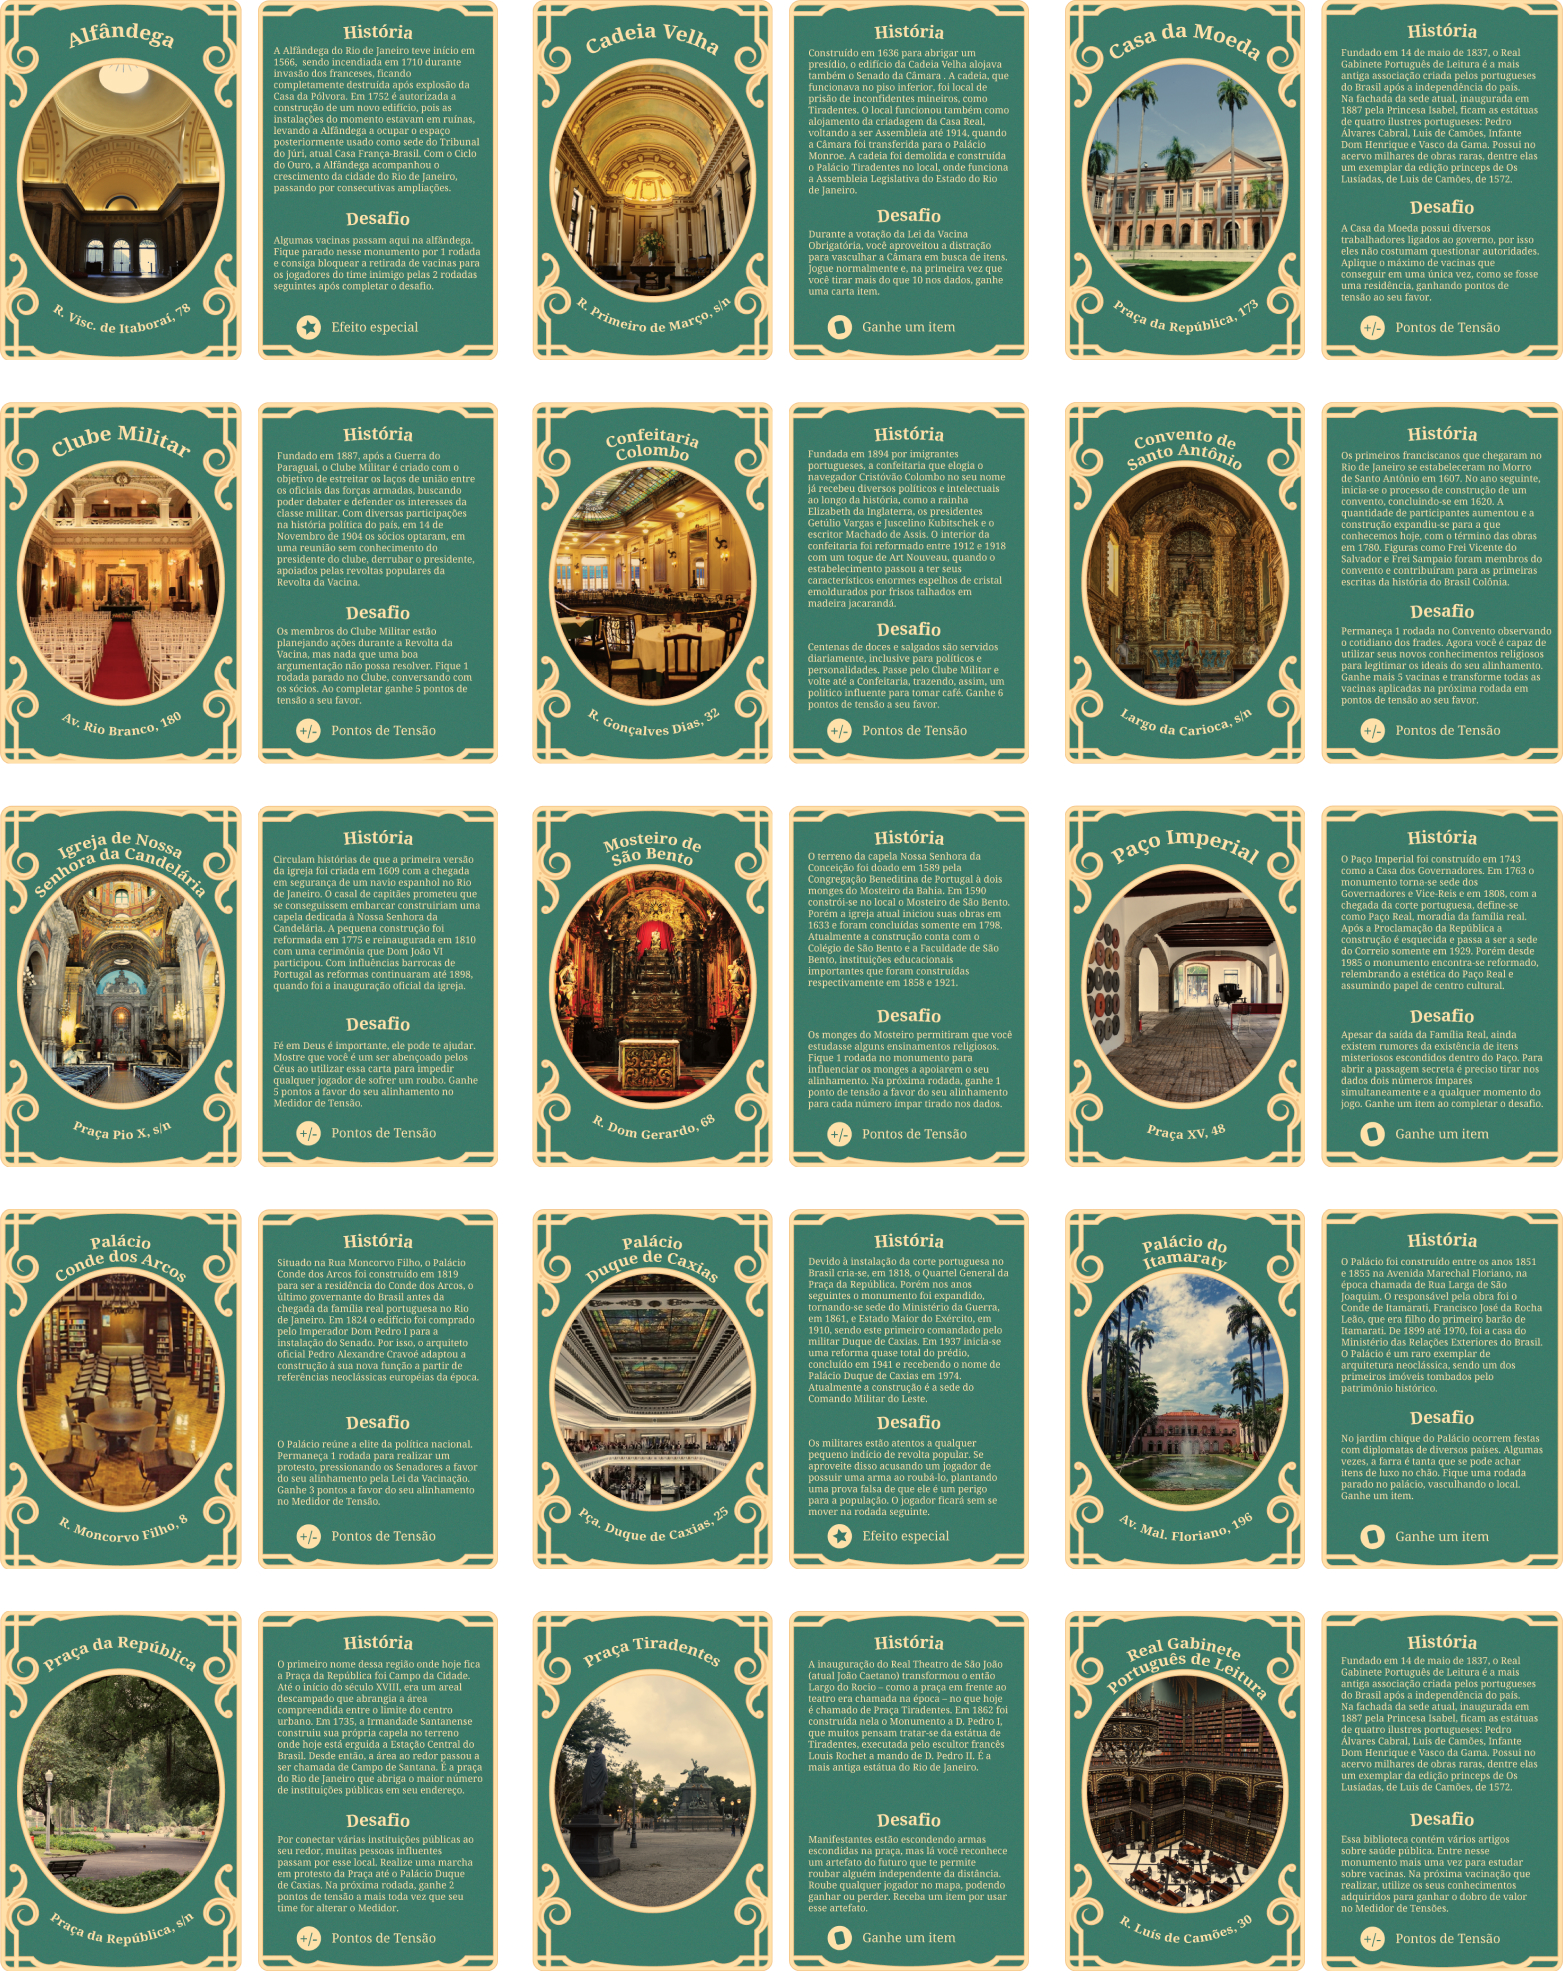 Grid showing all 15 monument cards